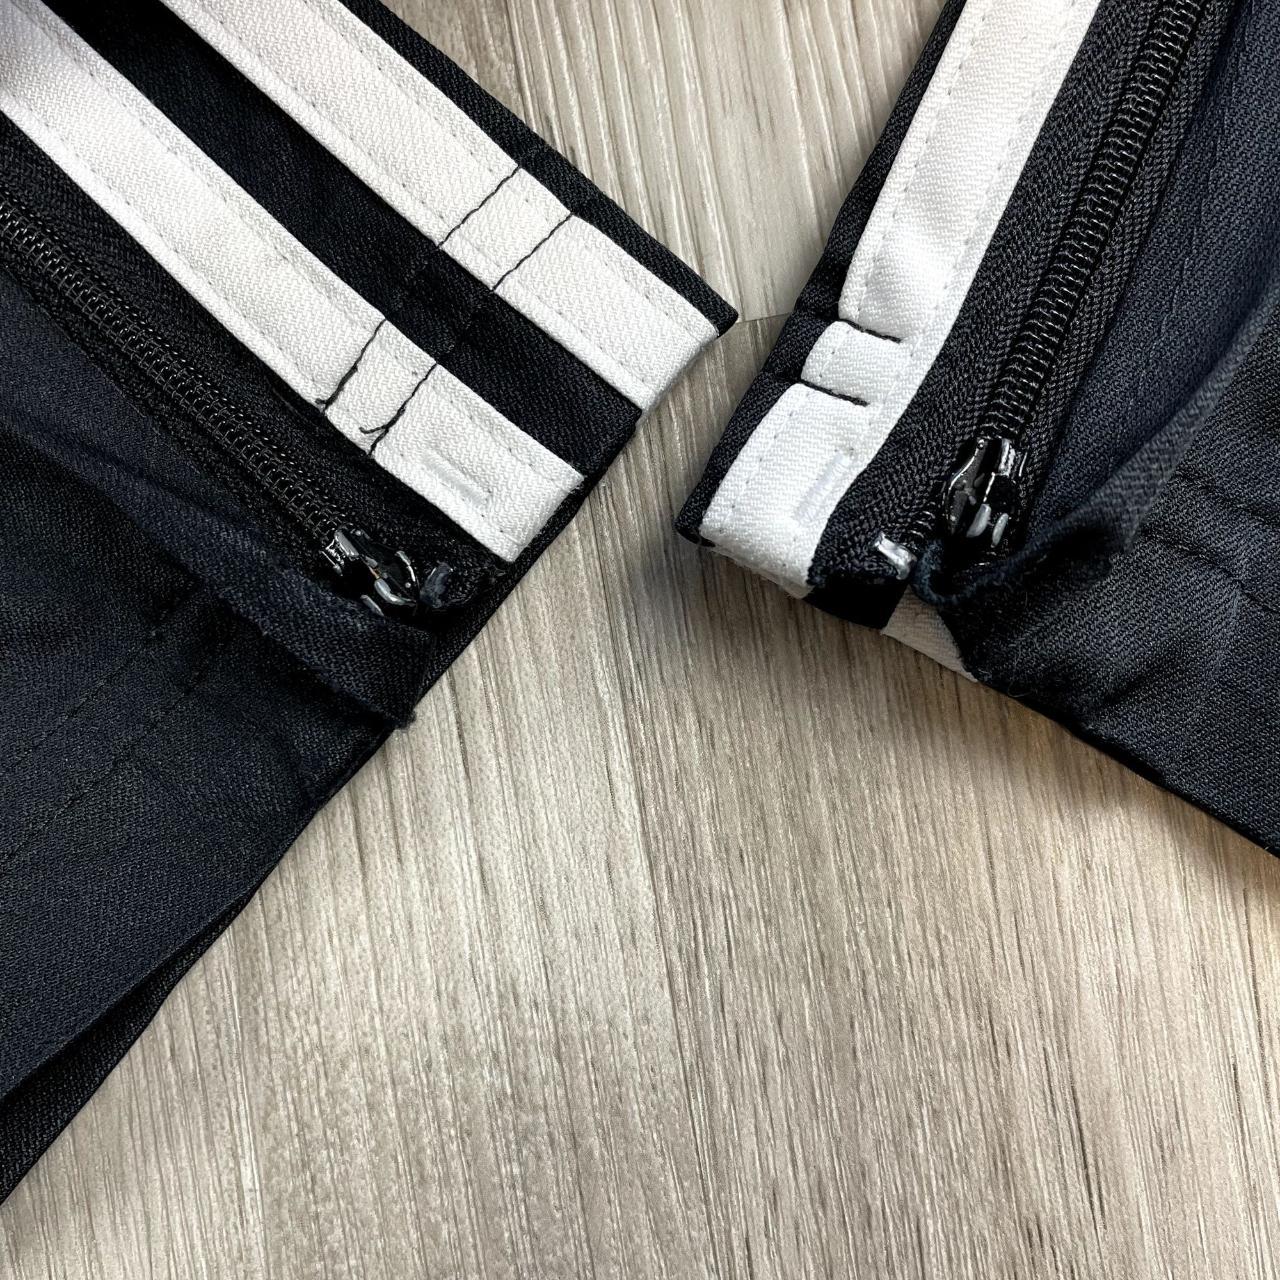 Adidas Climaproof black track pants with embroidered... - Depop